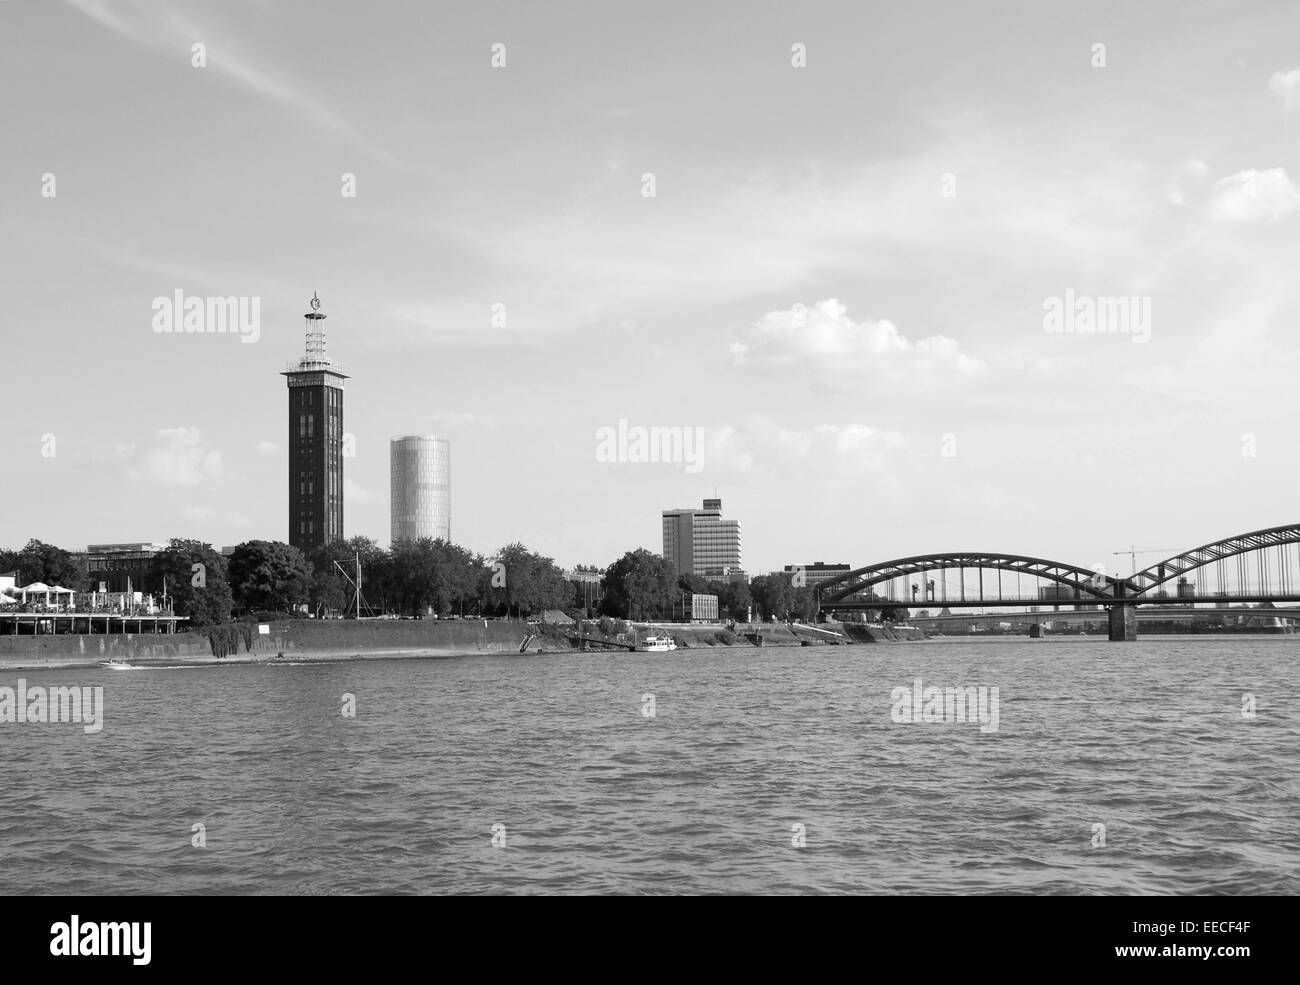 The Messeturm (Fair Tower), Triangle Tower and Hohenzollernbruecke (Hohenzollern Bridge) seen from the Rhine in Cologne, Germany Stock Photo